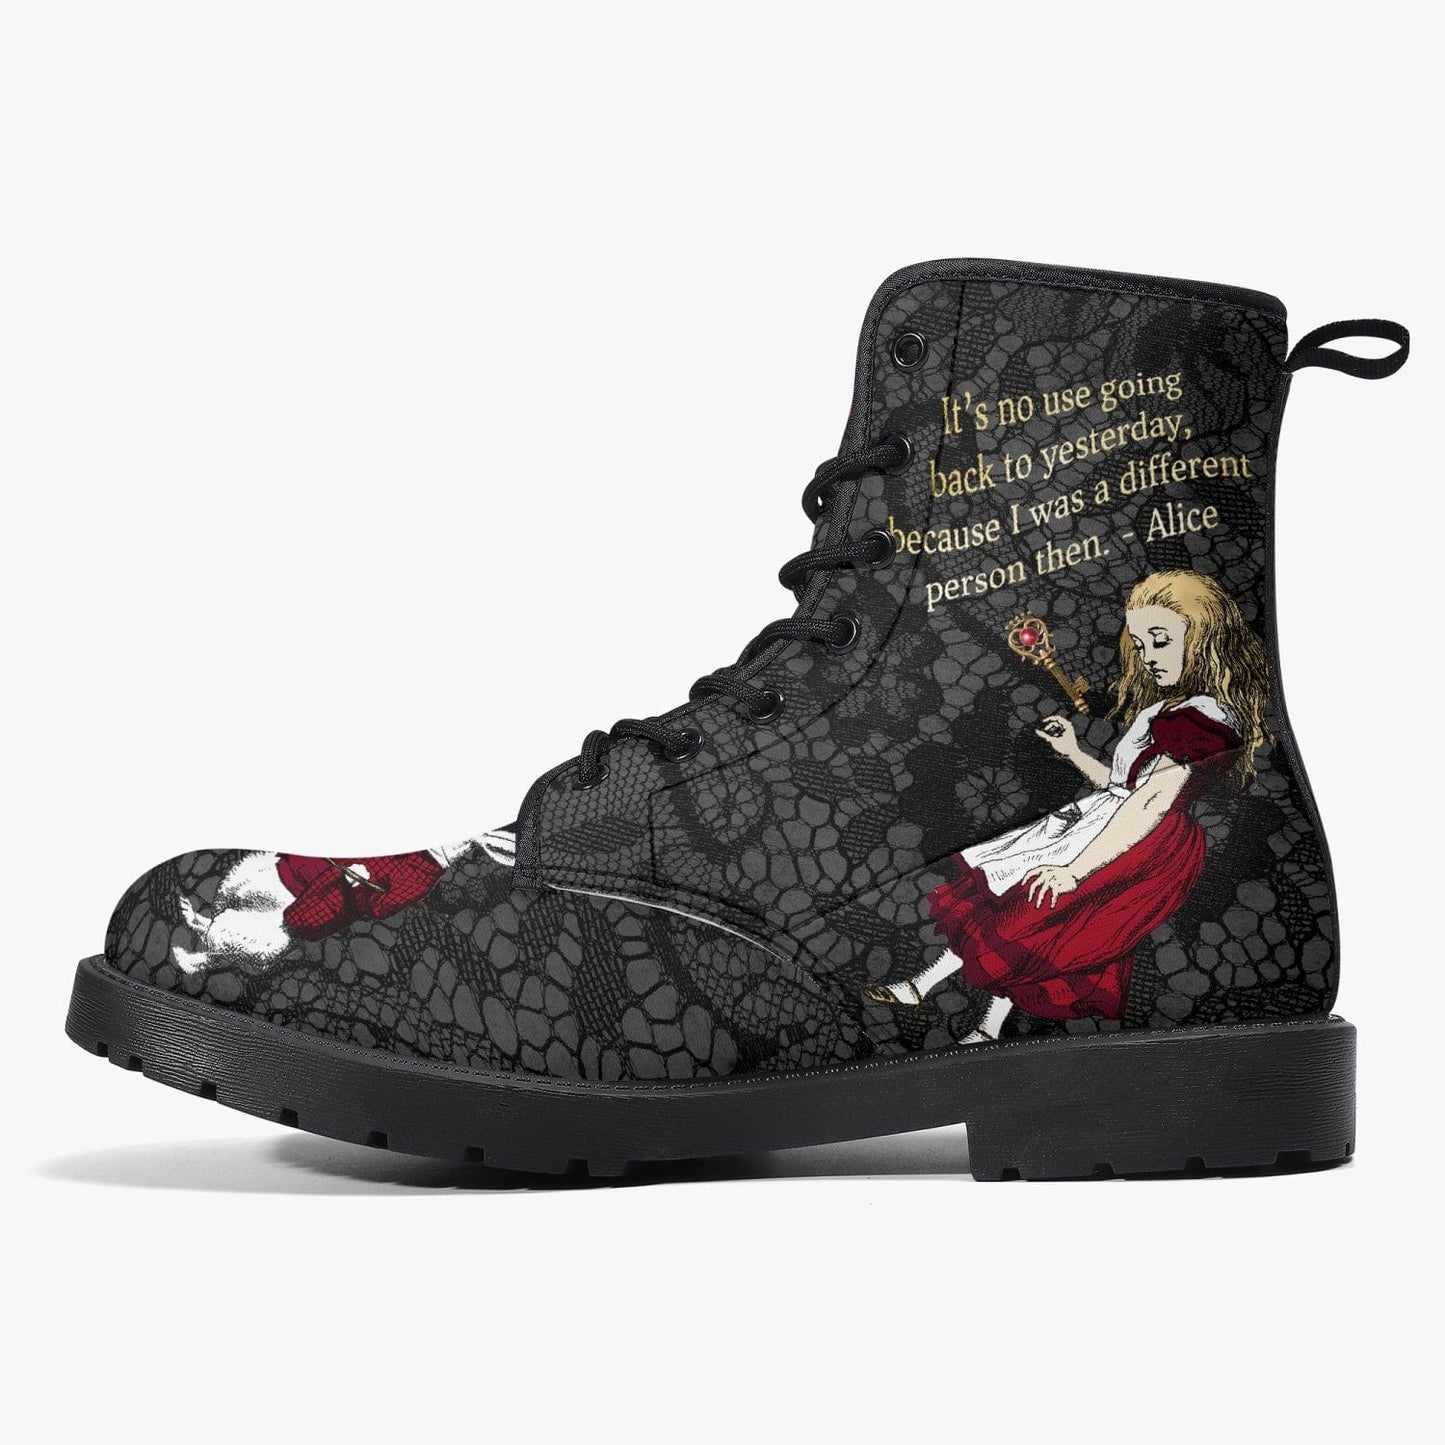 gothic black gold and red vegan boots featuring Alice in Wonderland quotes 1